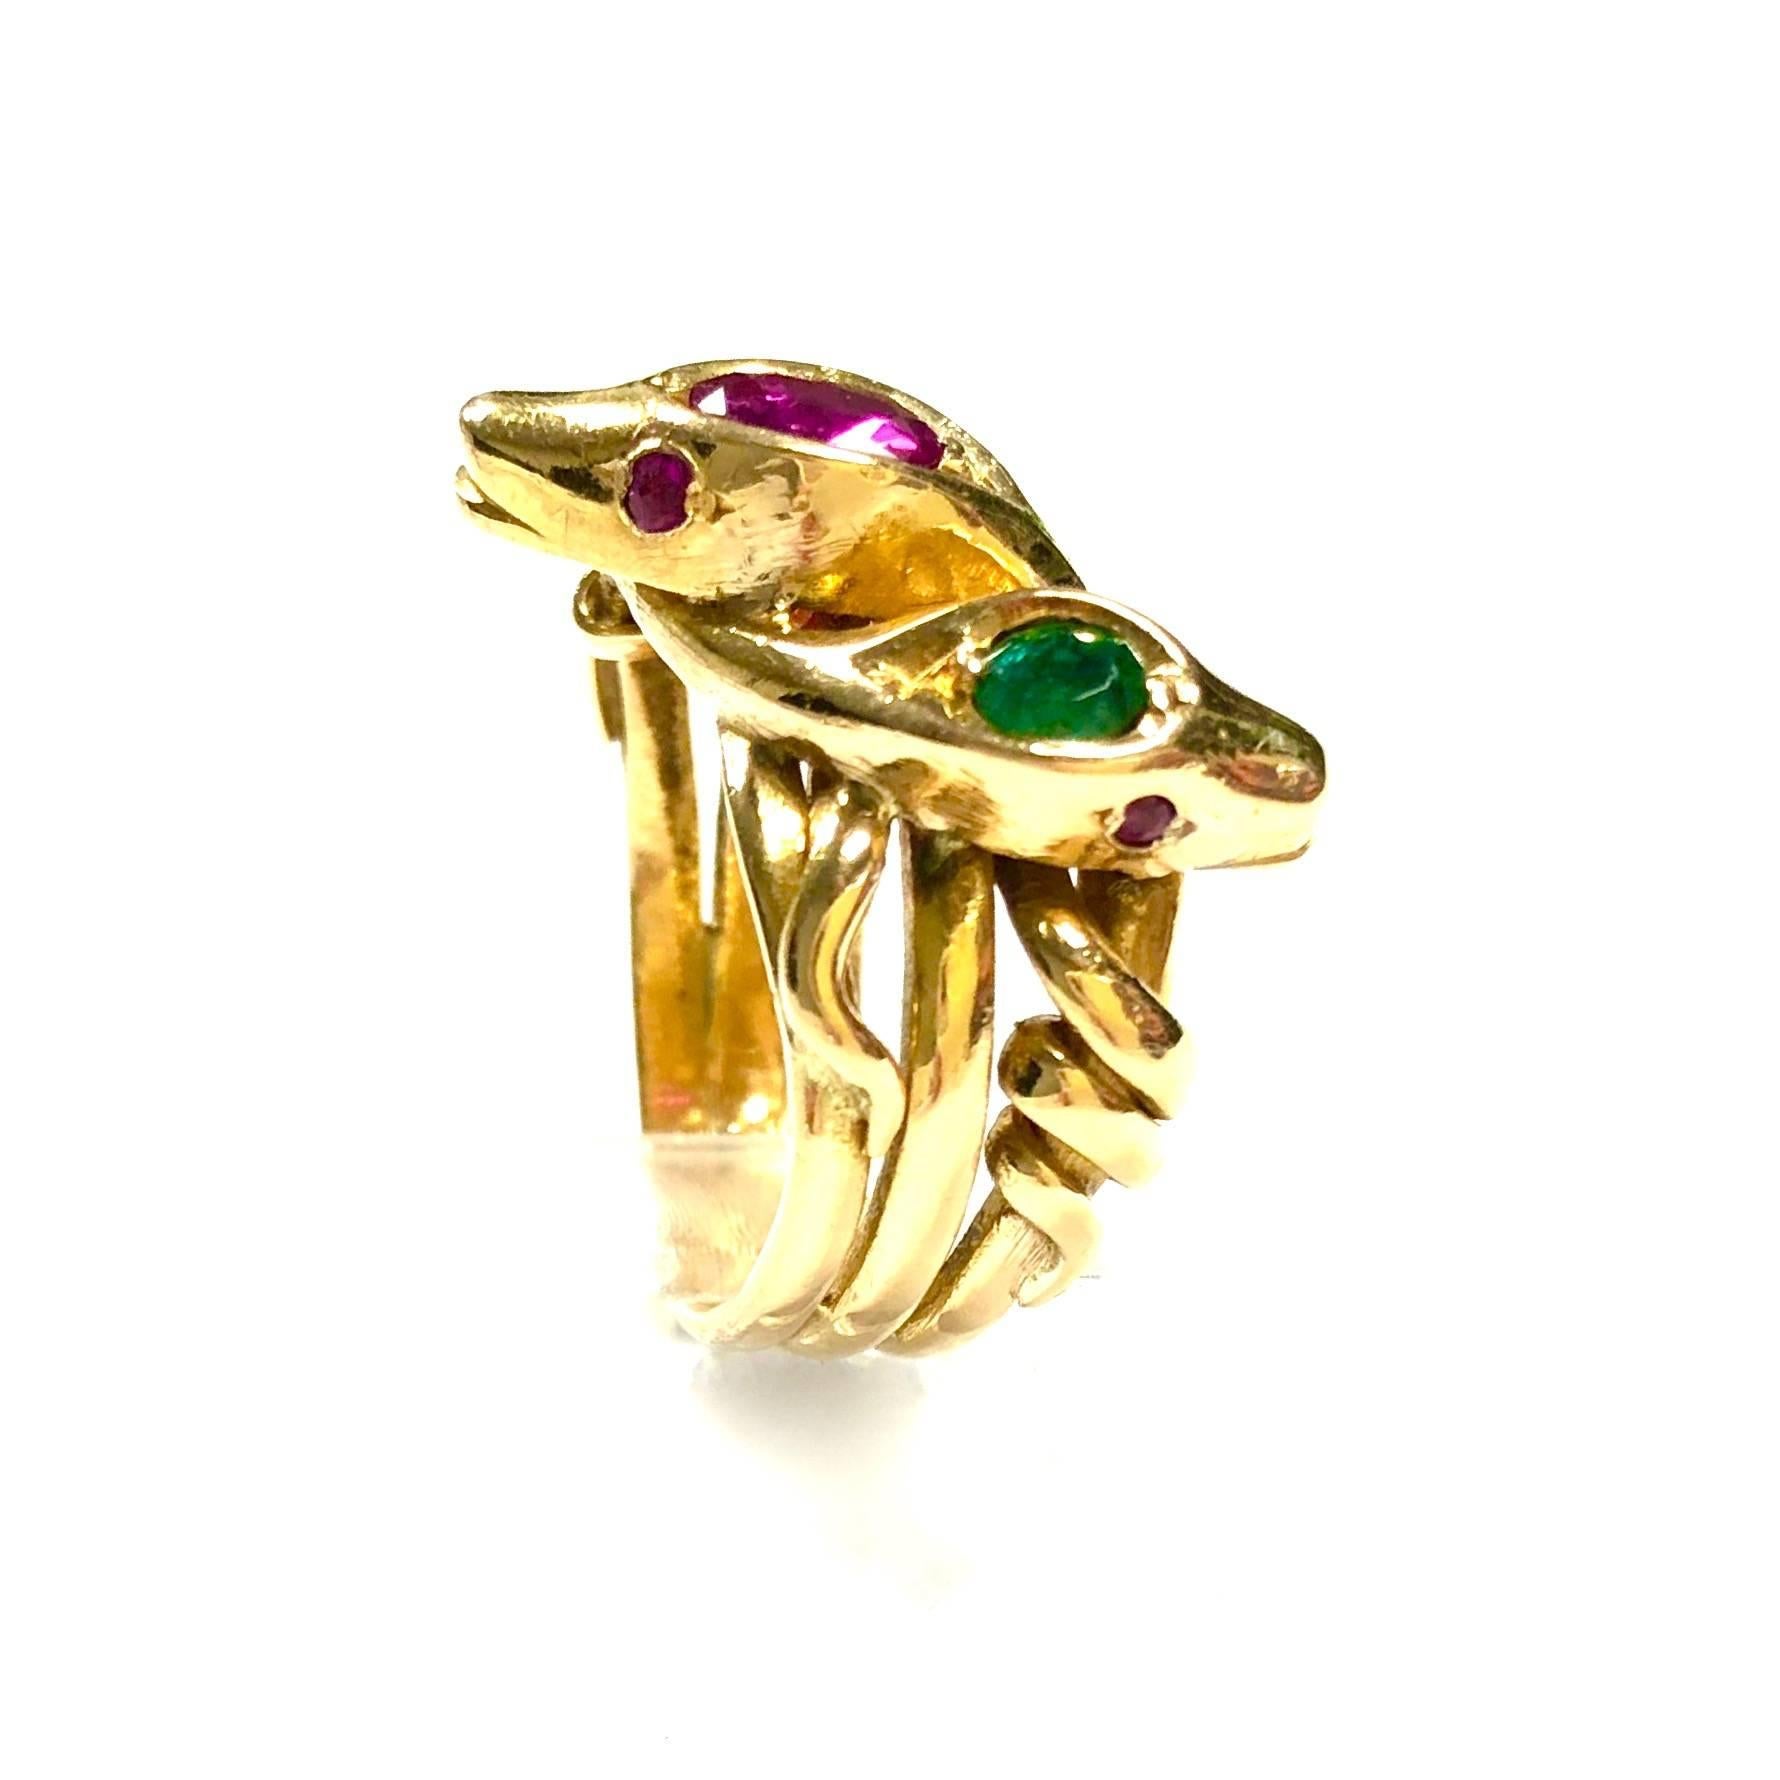 Crafted in 18K yellow gold, featuring a large snake head with natural ruby on top and ruby eyes, and two smaller heads with emerald on top and ruby eyes. 
The large oval ruby measures approx. 6.2x4.2mm. Strong, vivid color, no indication of heat